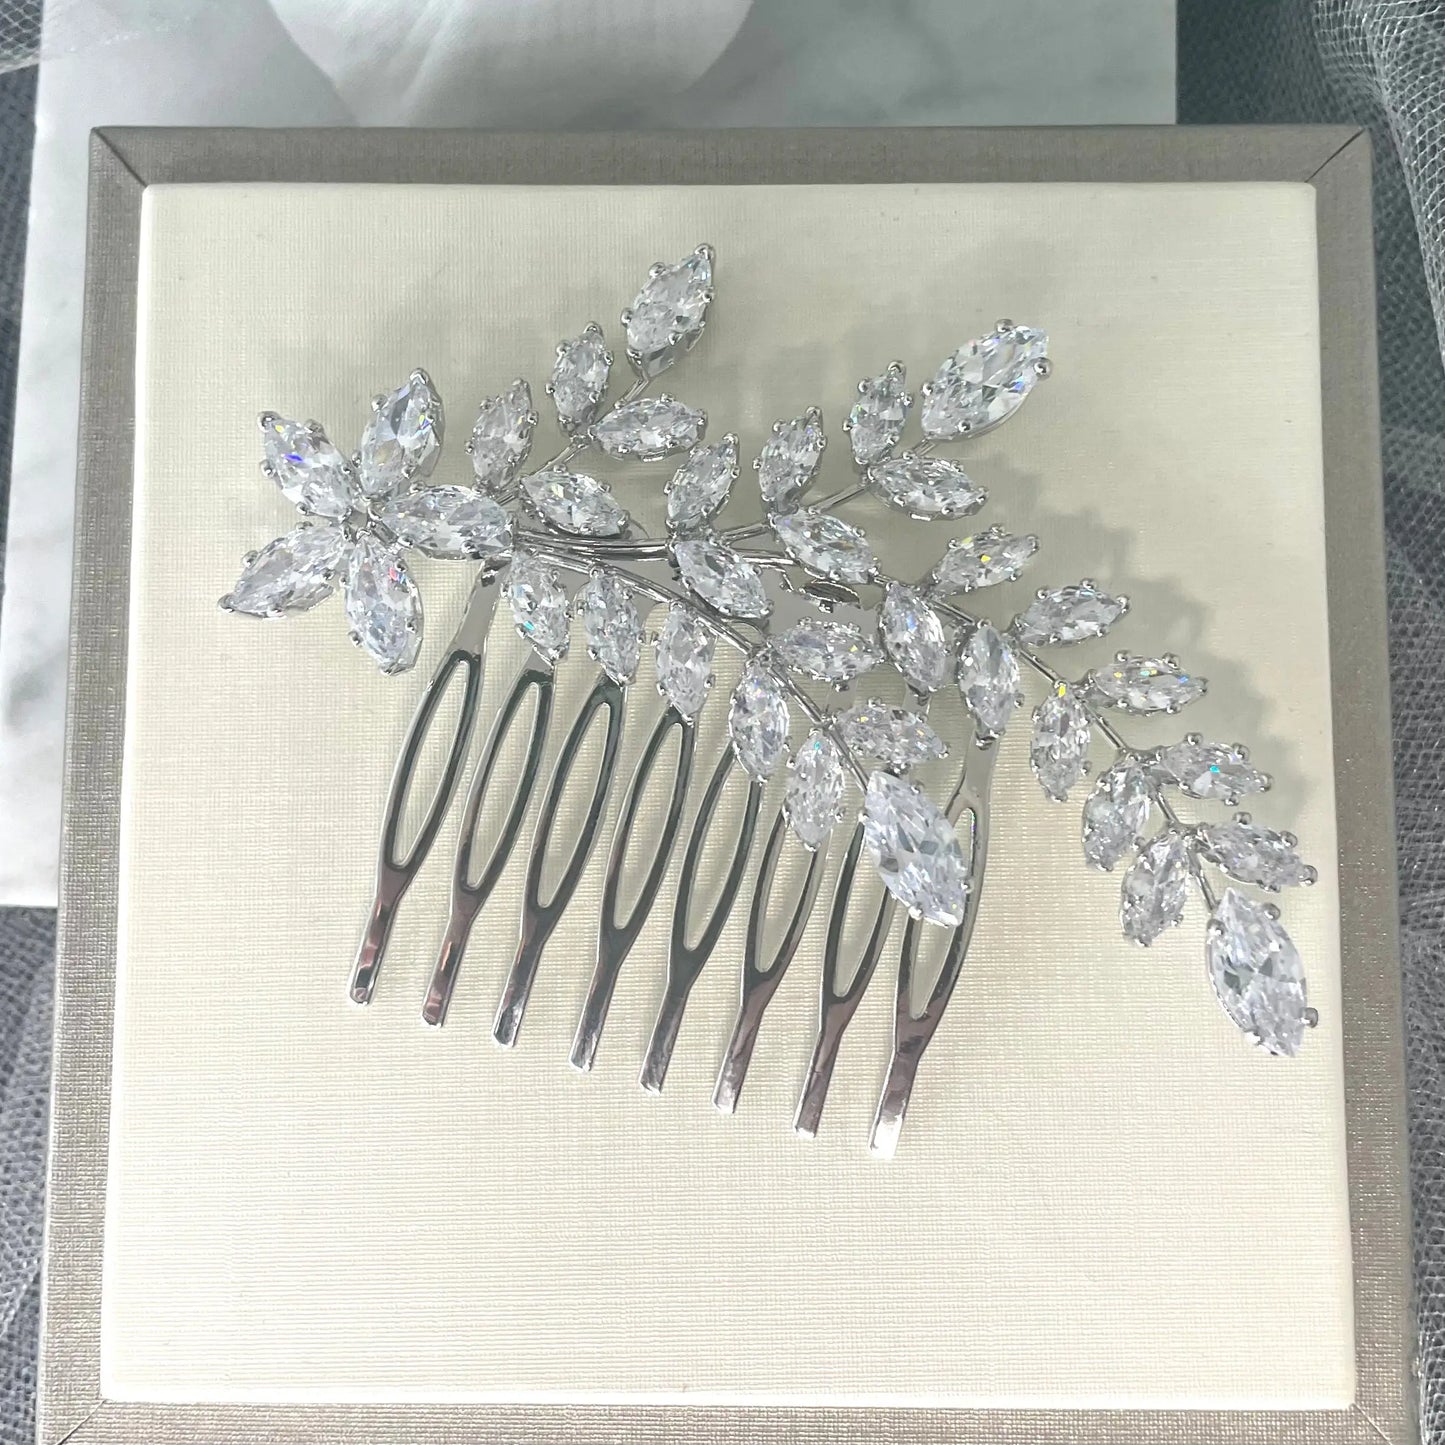 Sophisticated Ross Leaf Bridal Hair Comb in silver, adorned with sparkling marquise crystals, perfect for adding a contemporary and elegant touch to bridal hairstyles.